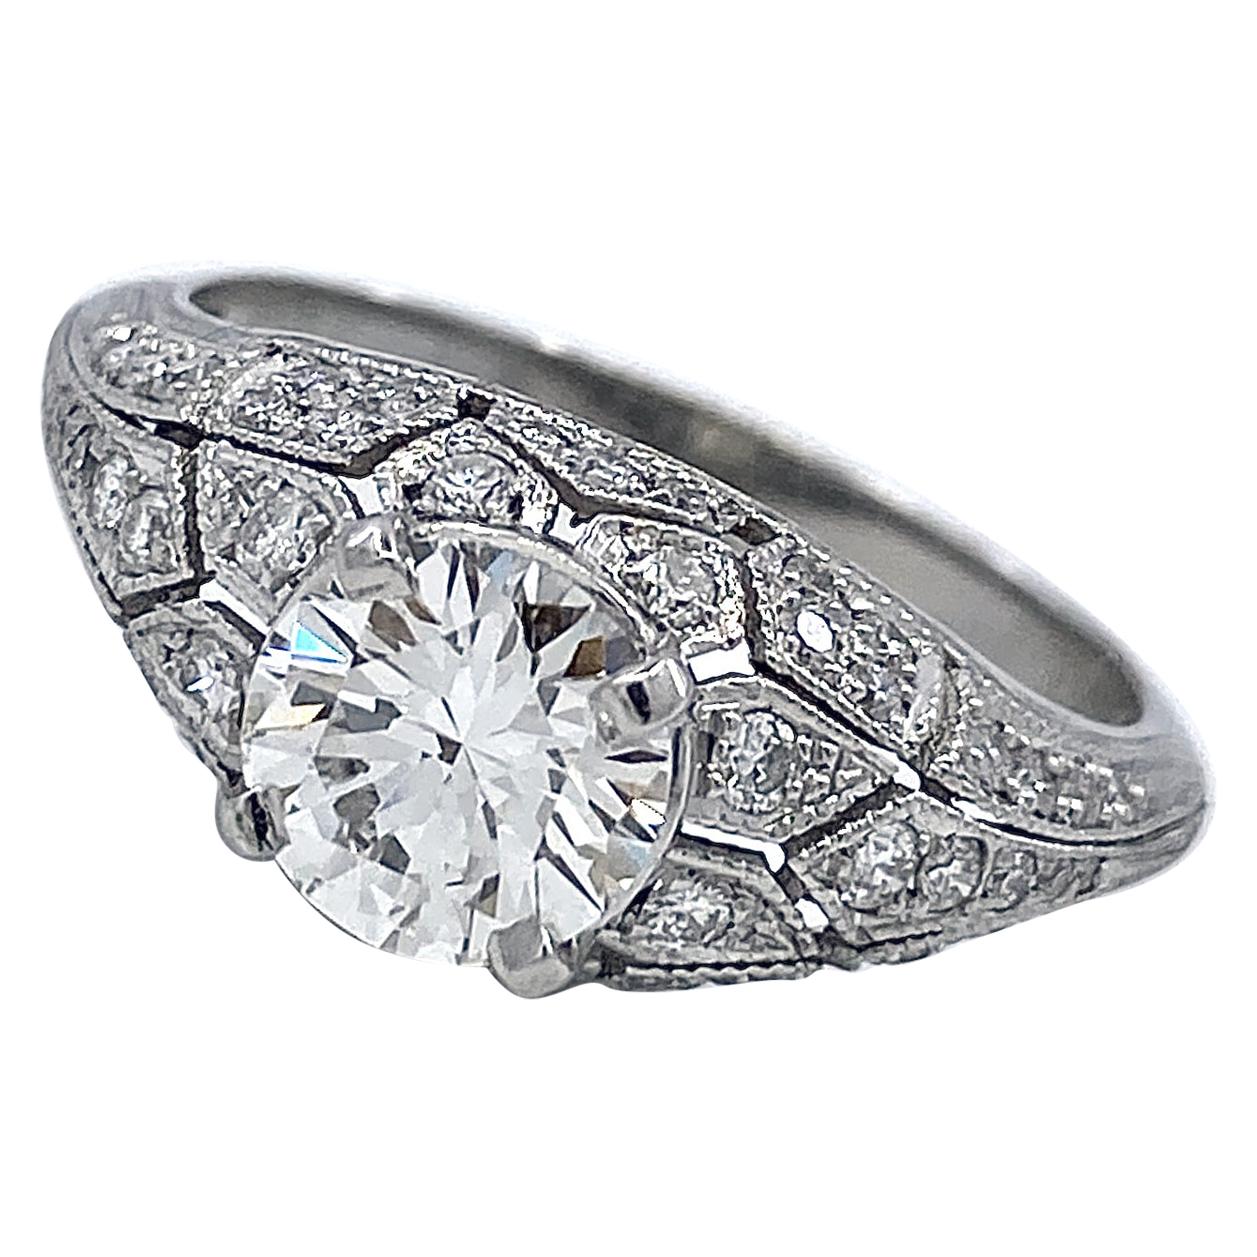 GIA Certified H/VS2 1.03 Carat Diamond in Bombe Edwardian-Style Platinum Ring For Sale